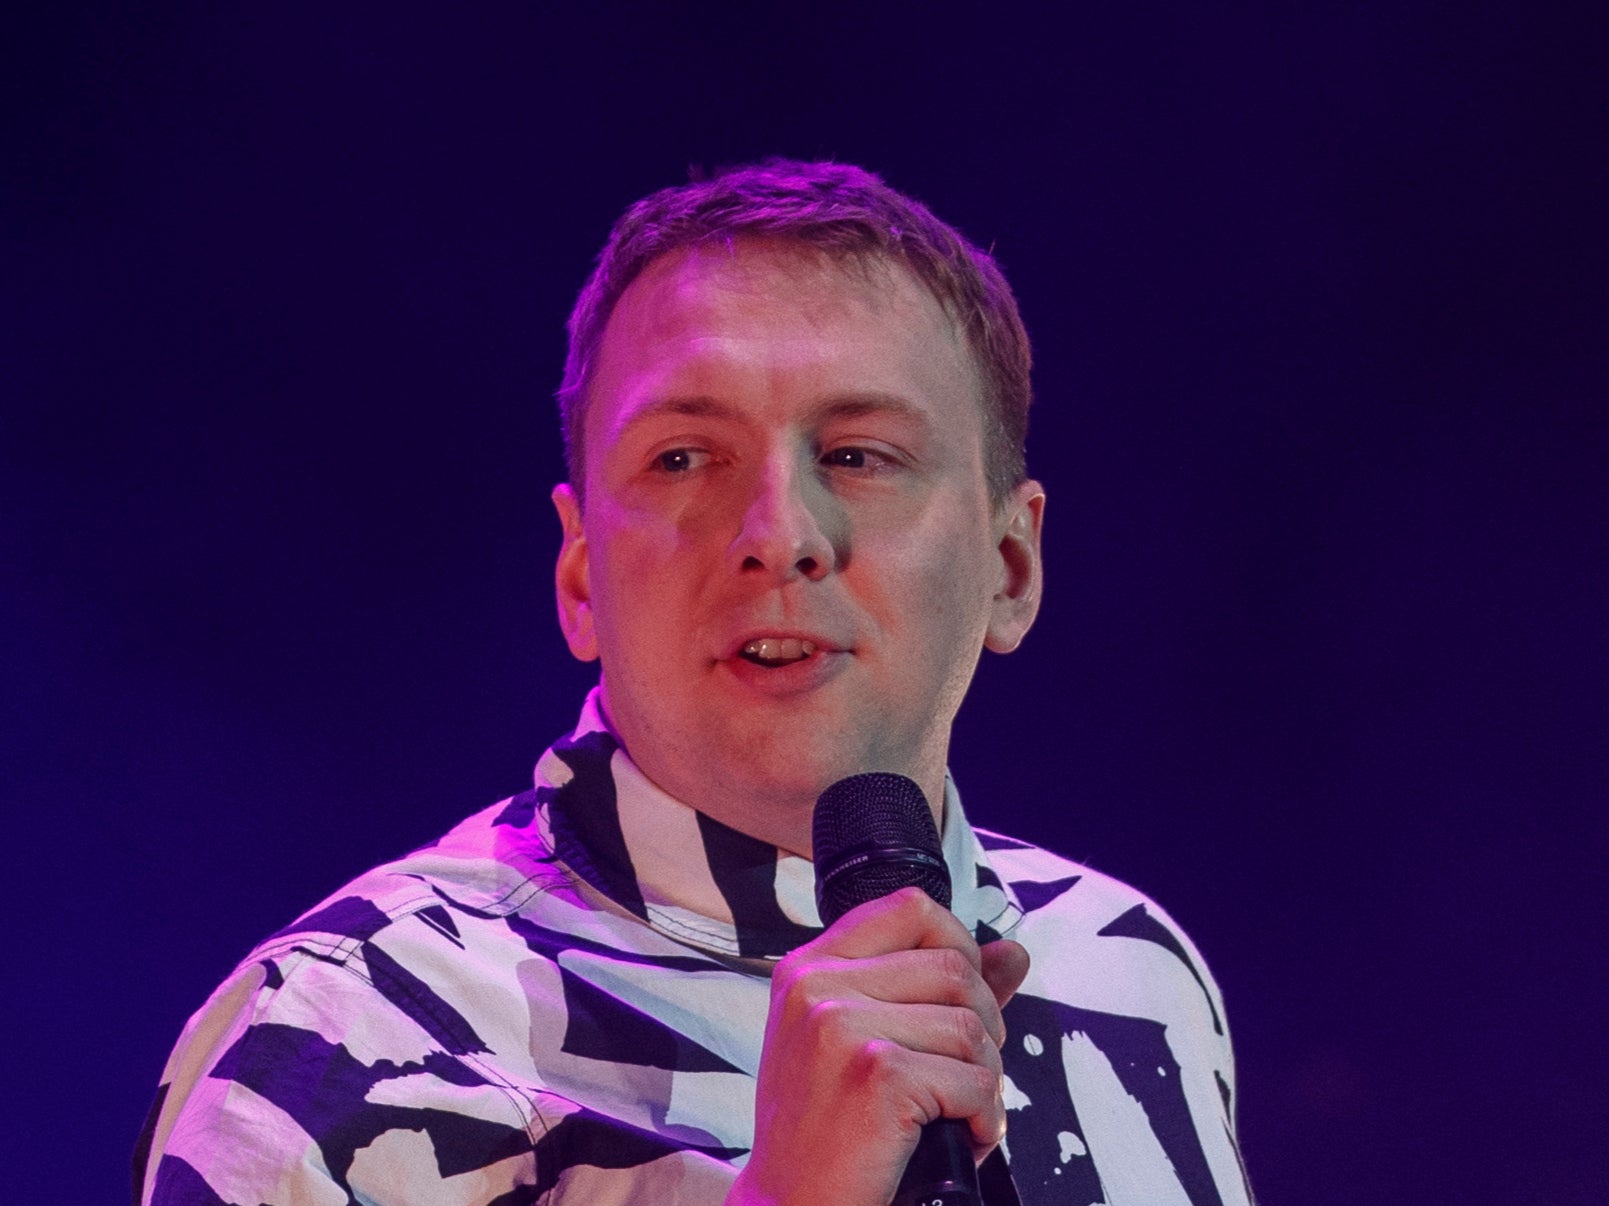 Joe Lycett on stage at ‘The Graham Norton Variety Show’ during Just for Laughs London on 3 March 2023